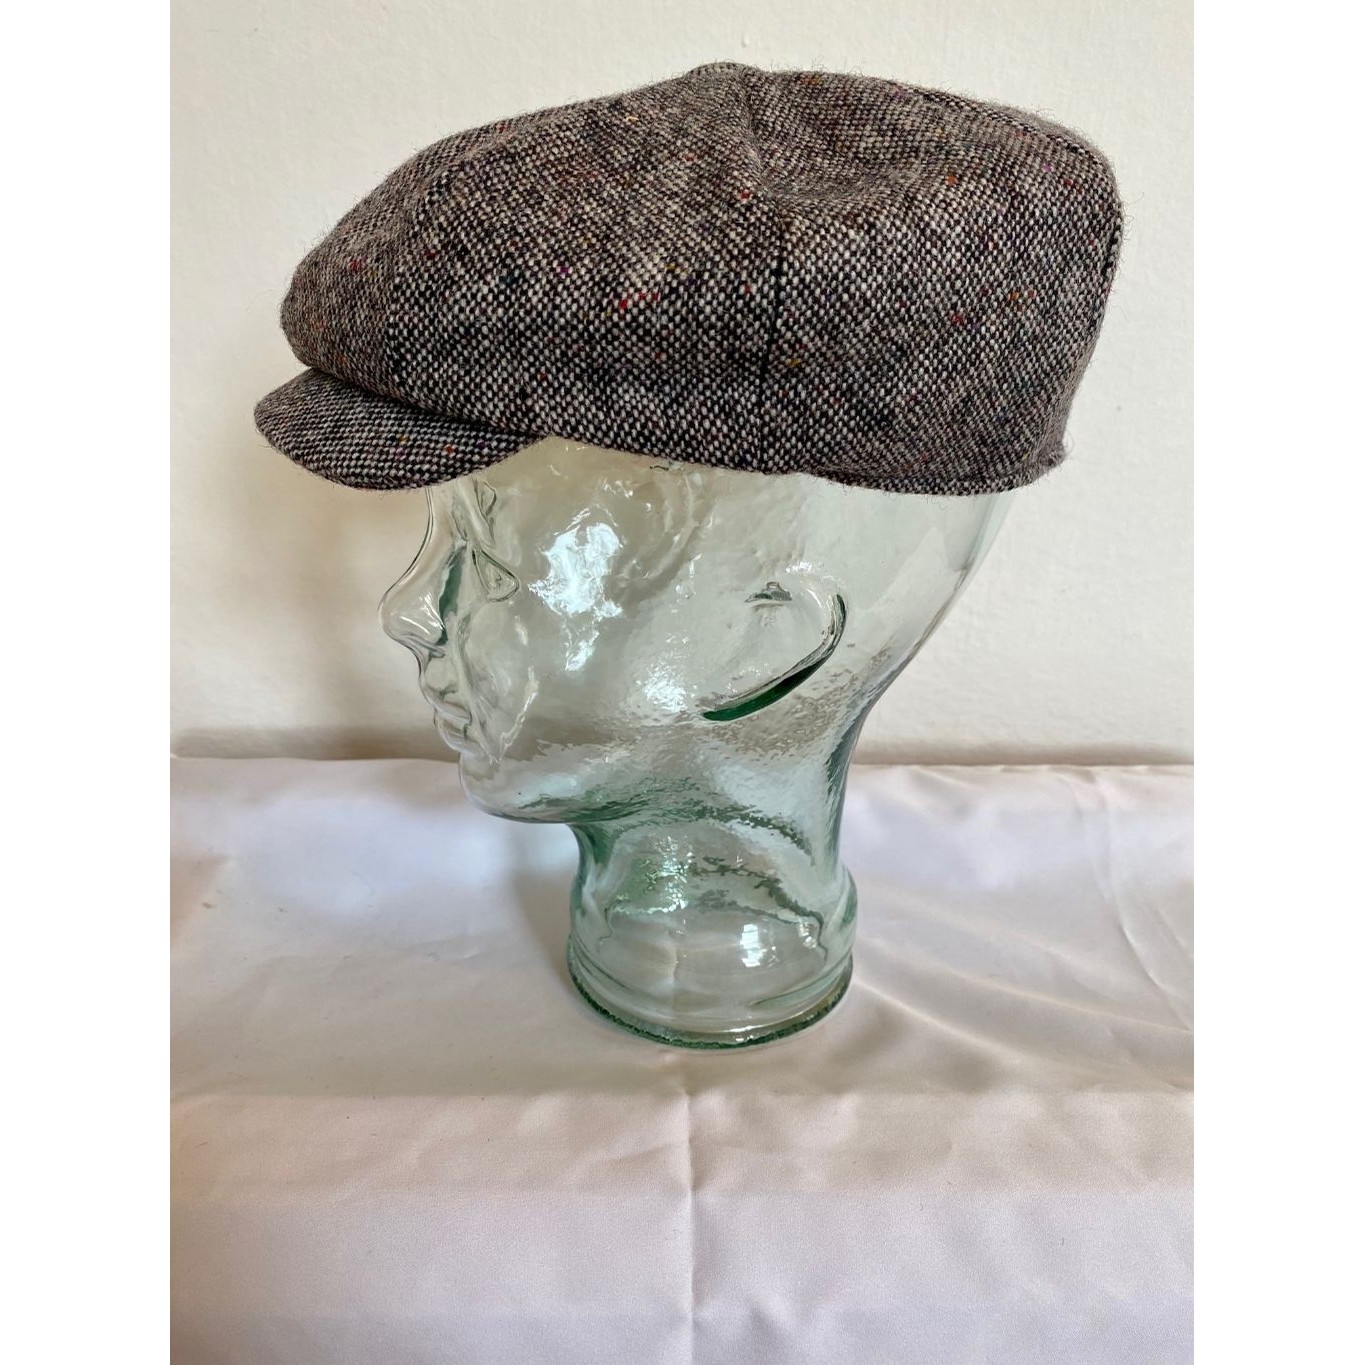 Hanna Hats Peaky Blinder Cap (Speckled Grey and Cream) Clothing Caps ...